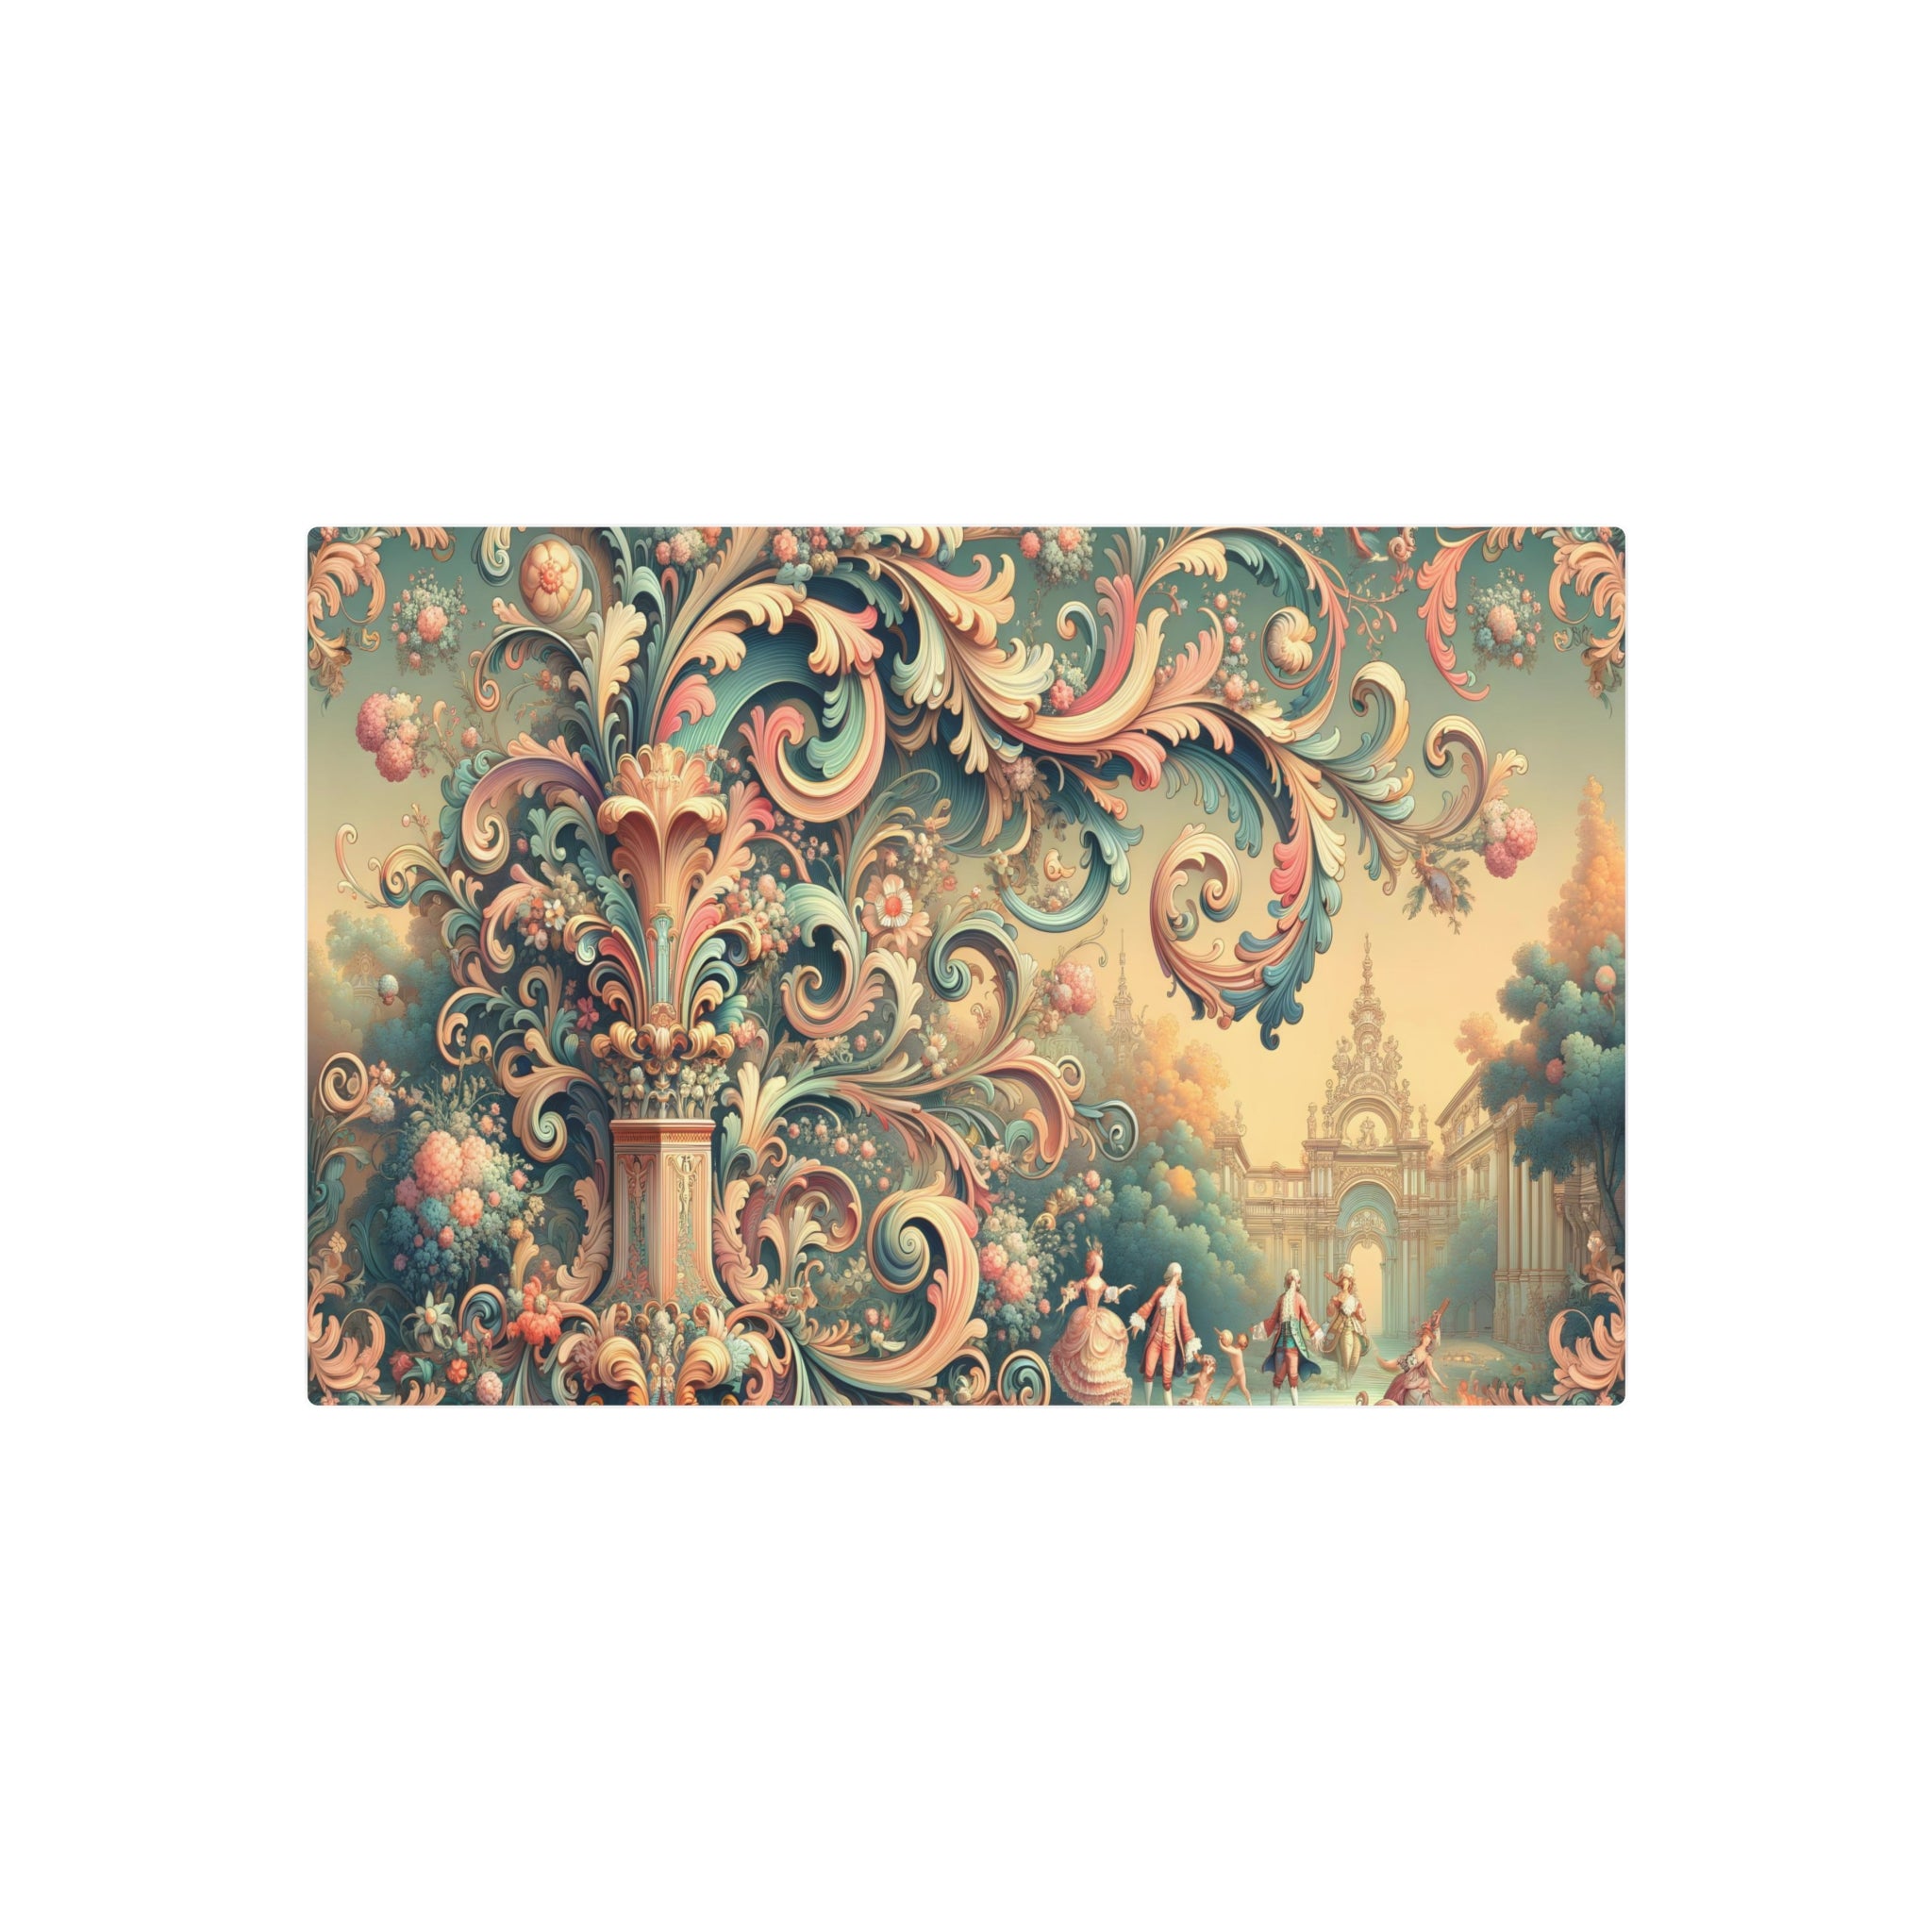 Metal Poster Art | "Rococo Art Style Print - Intricate and Ornate Western Art with Pastel Colors, Playful Themes & Romantic Elements"